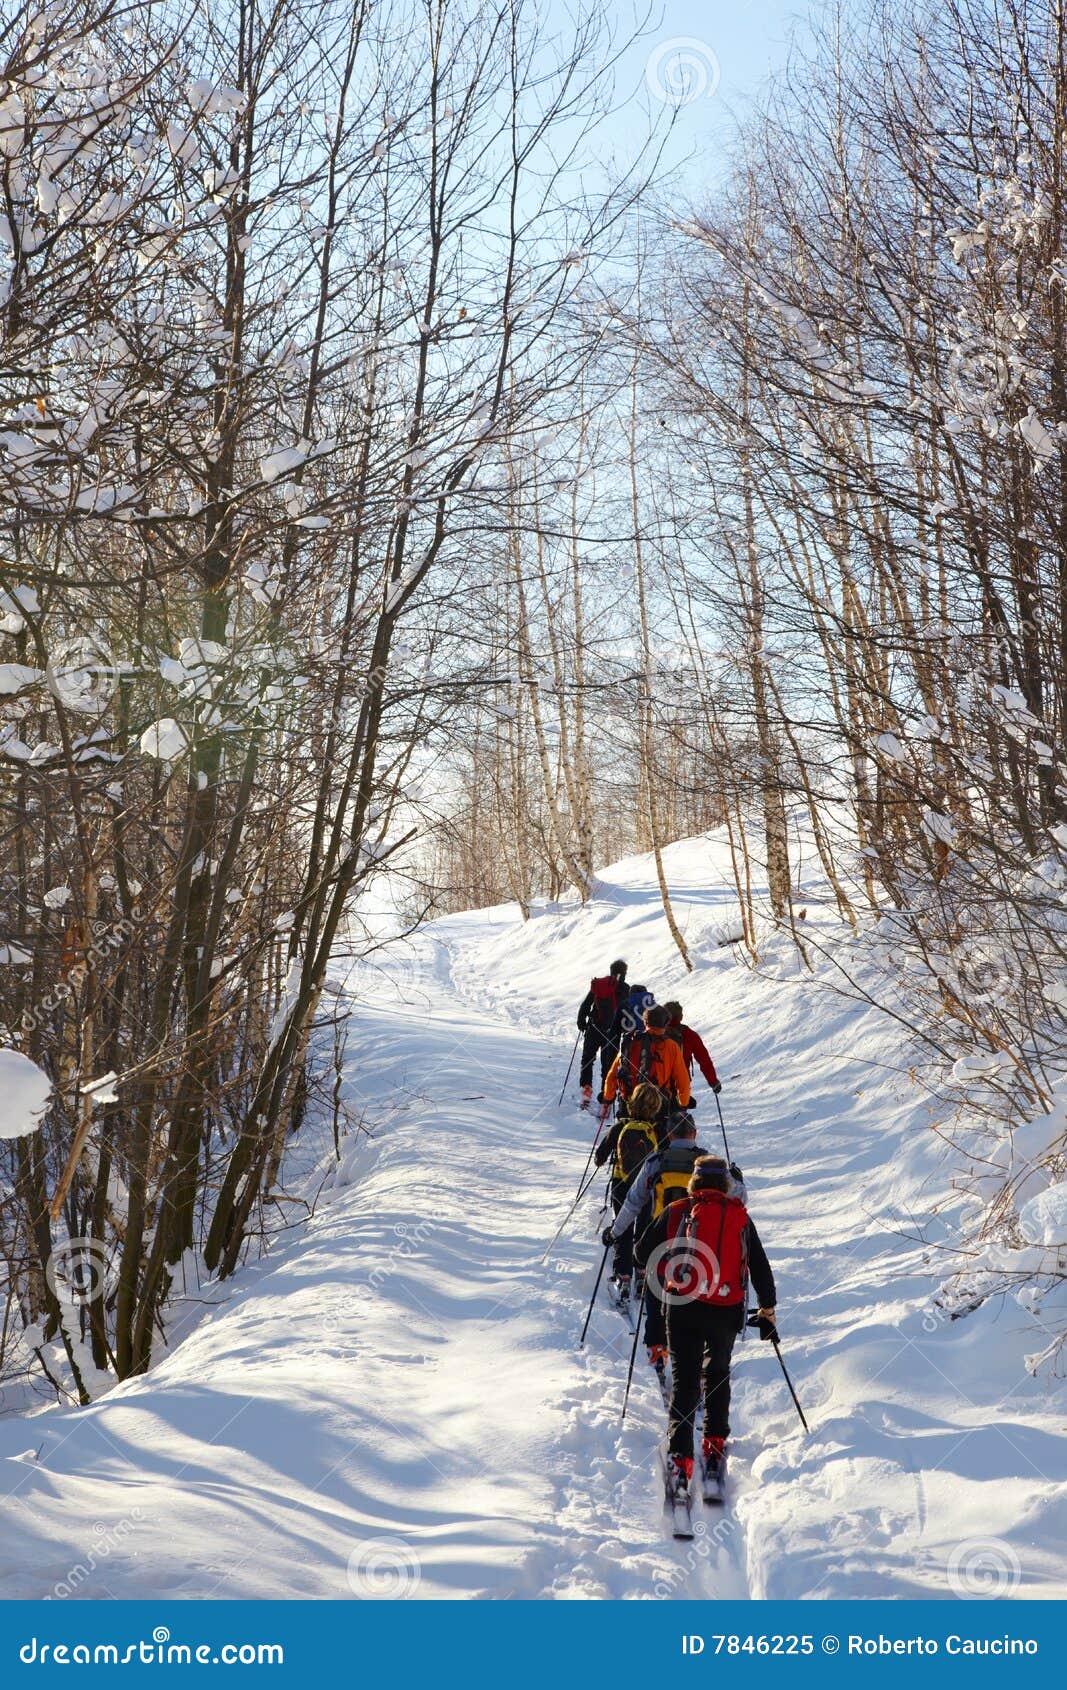 a group of backcountry skiers